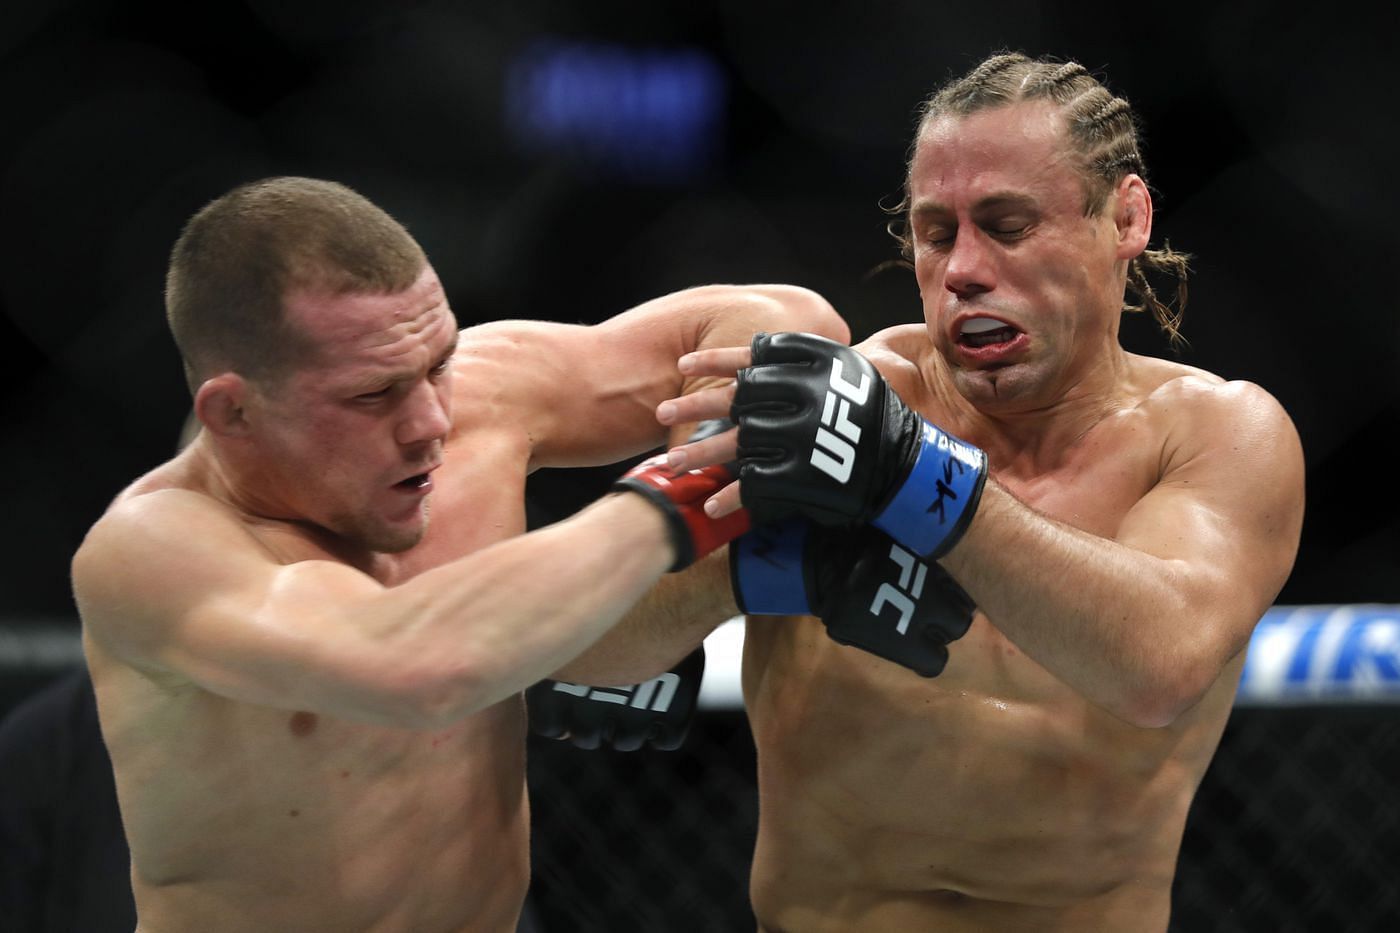 Veteran Urijah Faber appeared to be a sacrificial victim when he faced Petr Yan in 2019